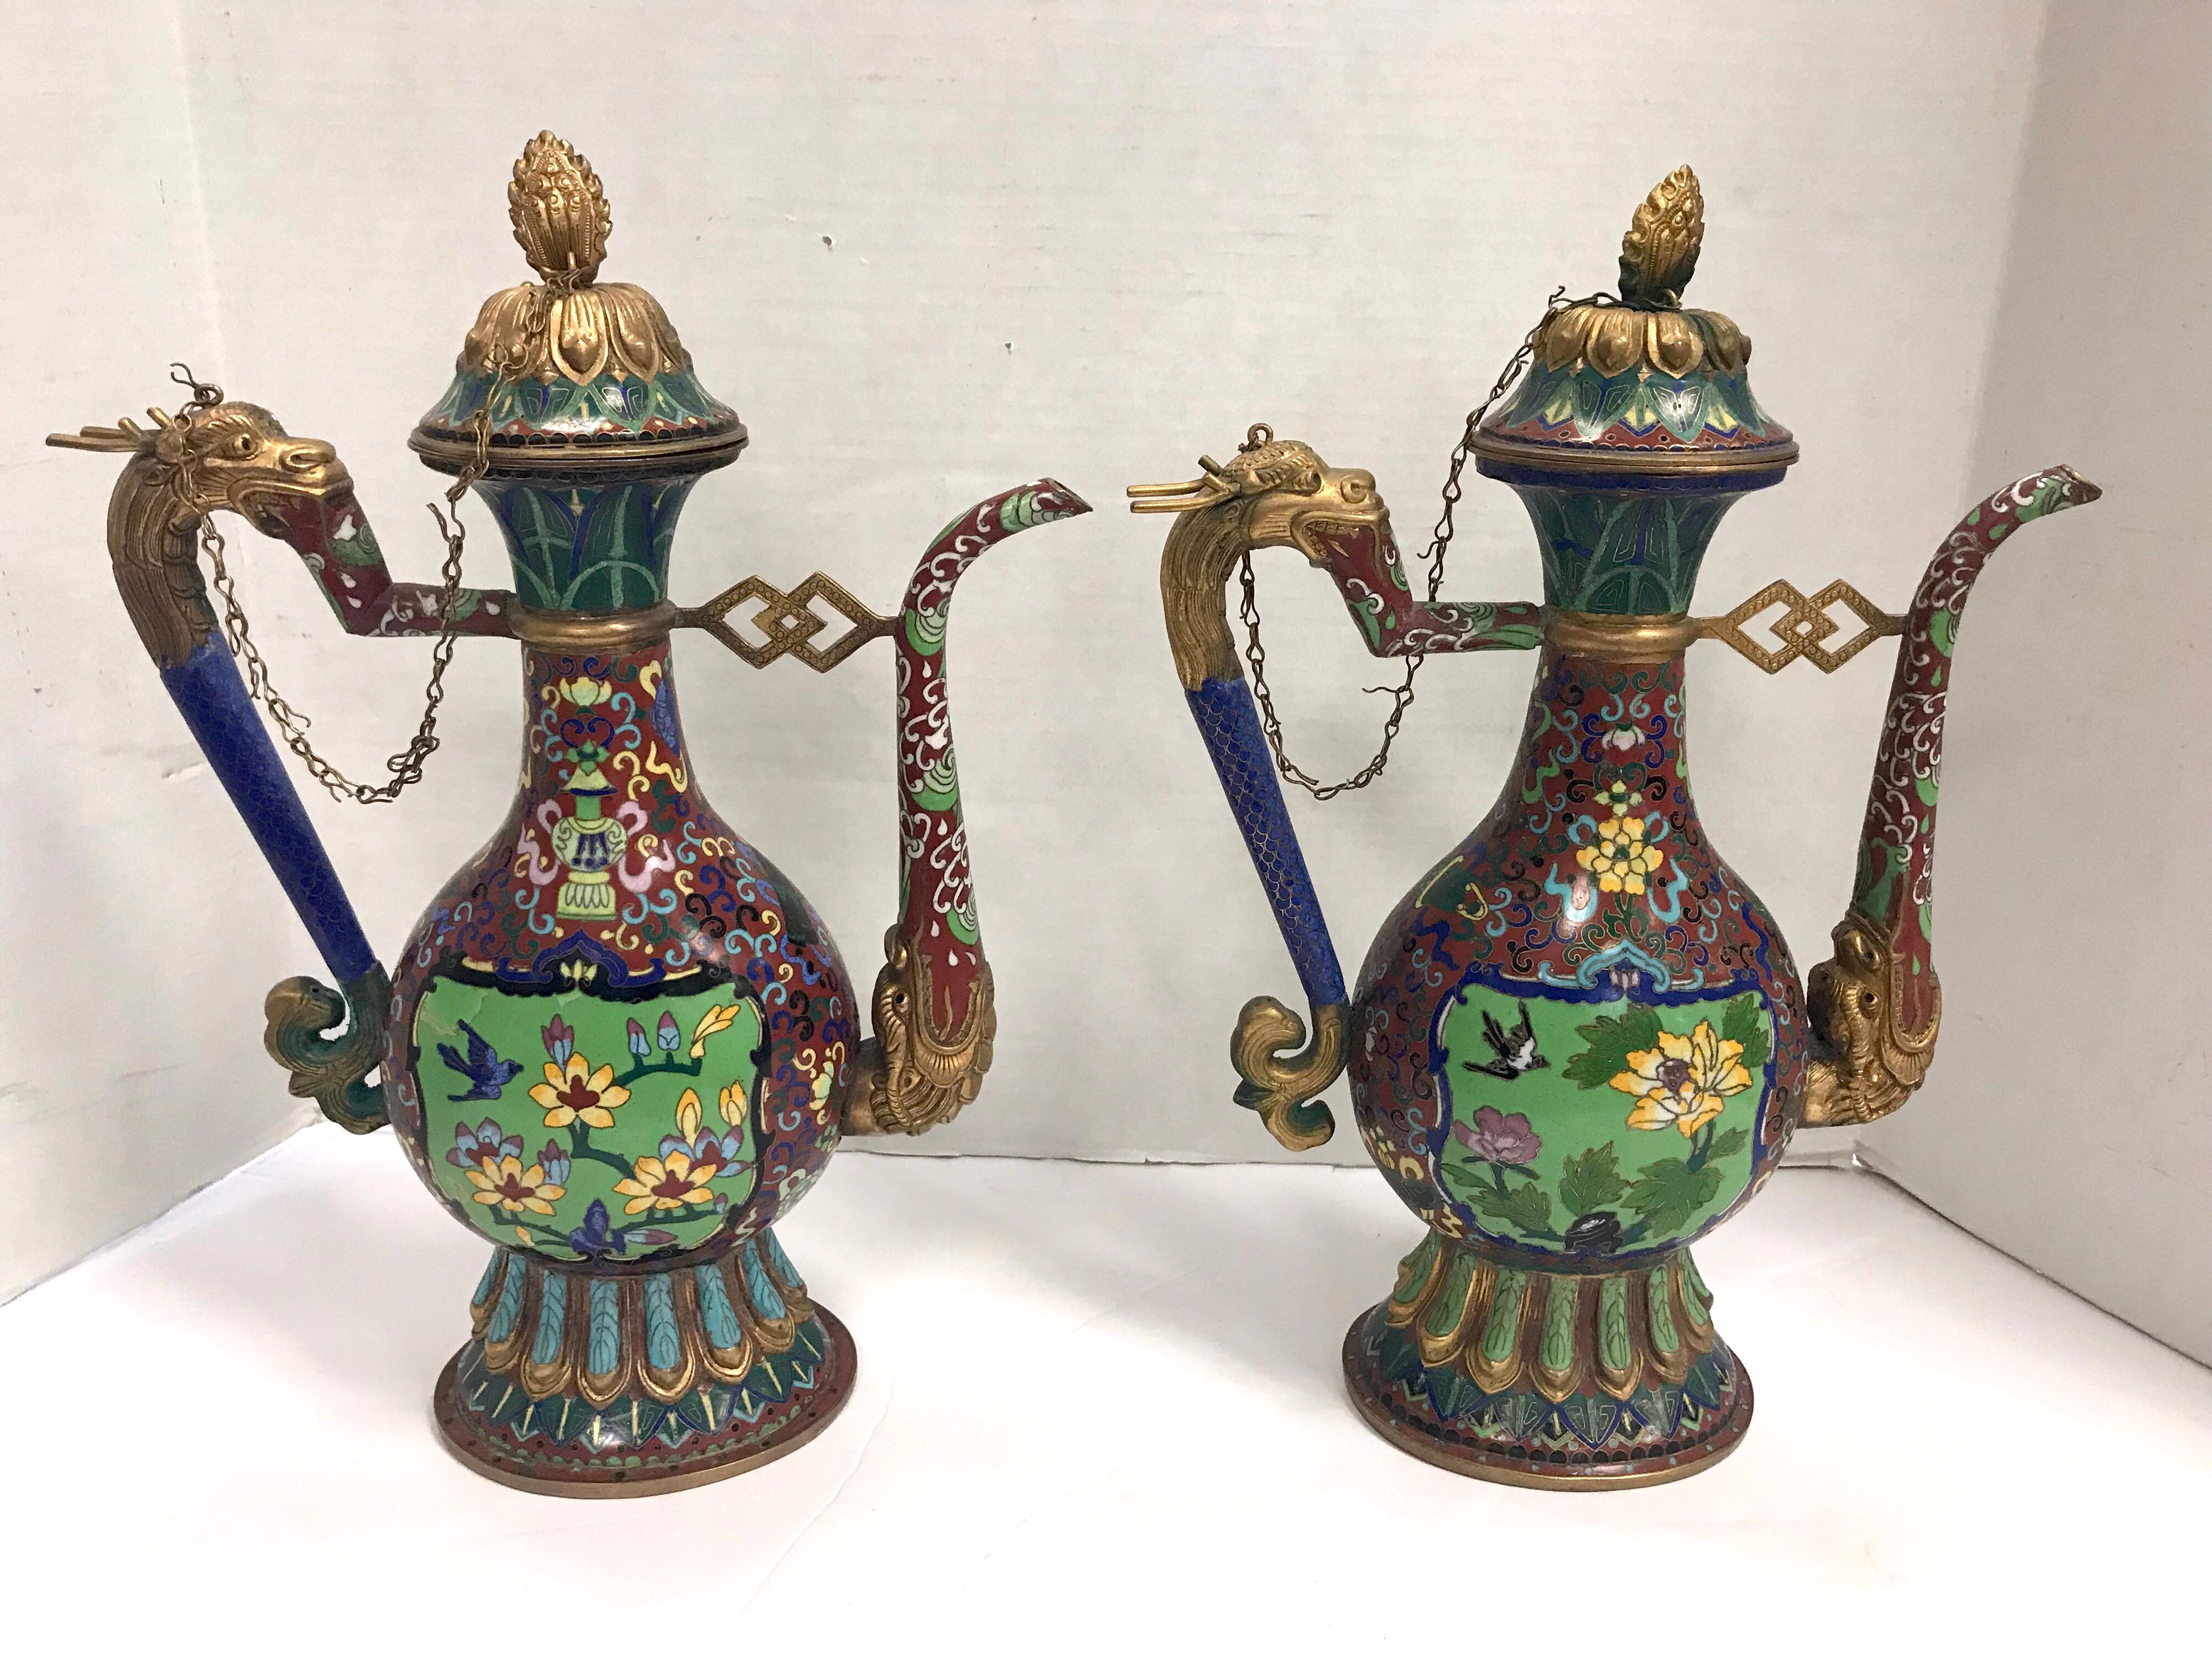 Stunning pair of coveted Chinese Cloisonne ewers or pitchers. The colors are still
vibrant and vivid. There is a chain that connects the lid to the body of each piece.